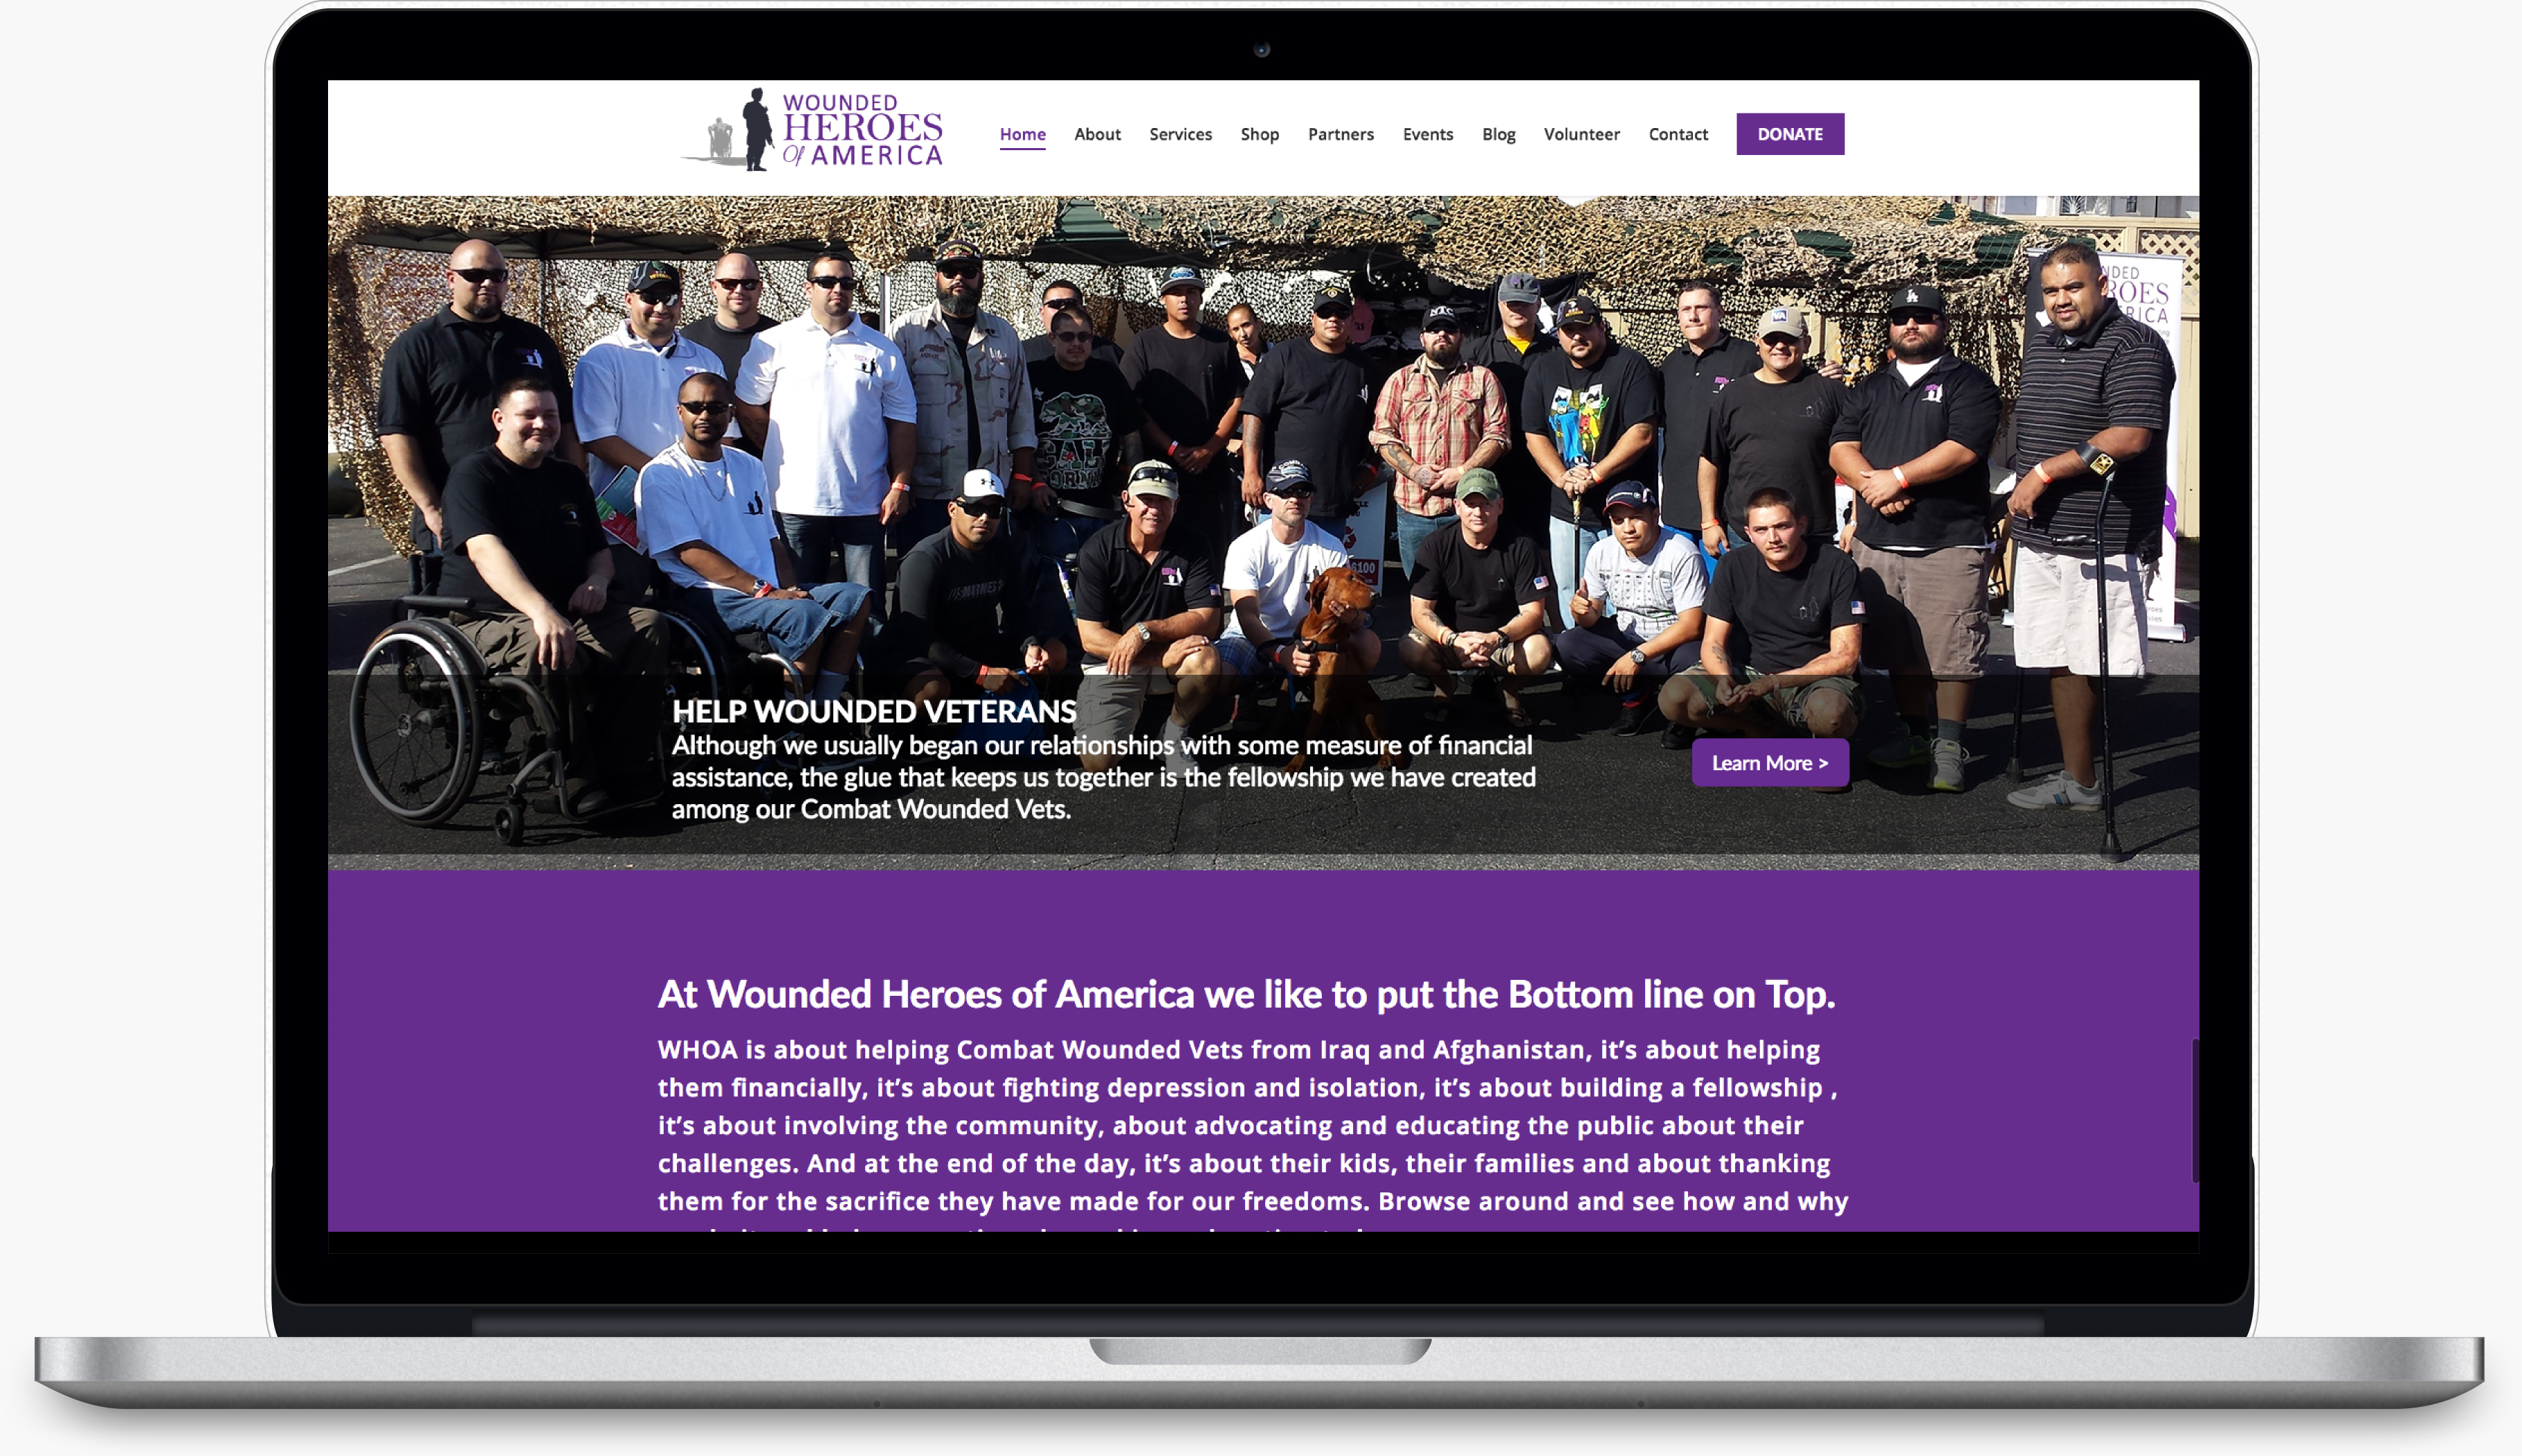 Wounded Heroes of America Website Redesign: An Inspiring Project For An Inspiring Cause